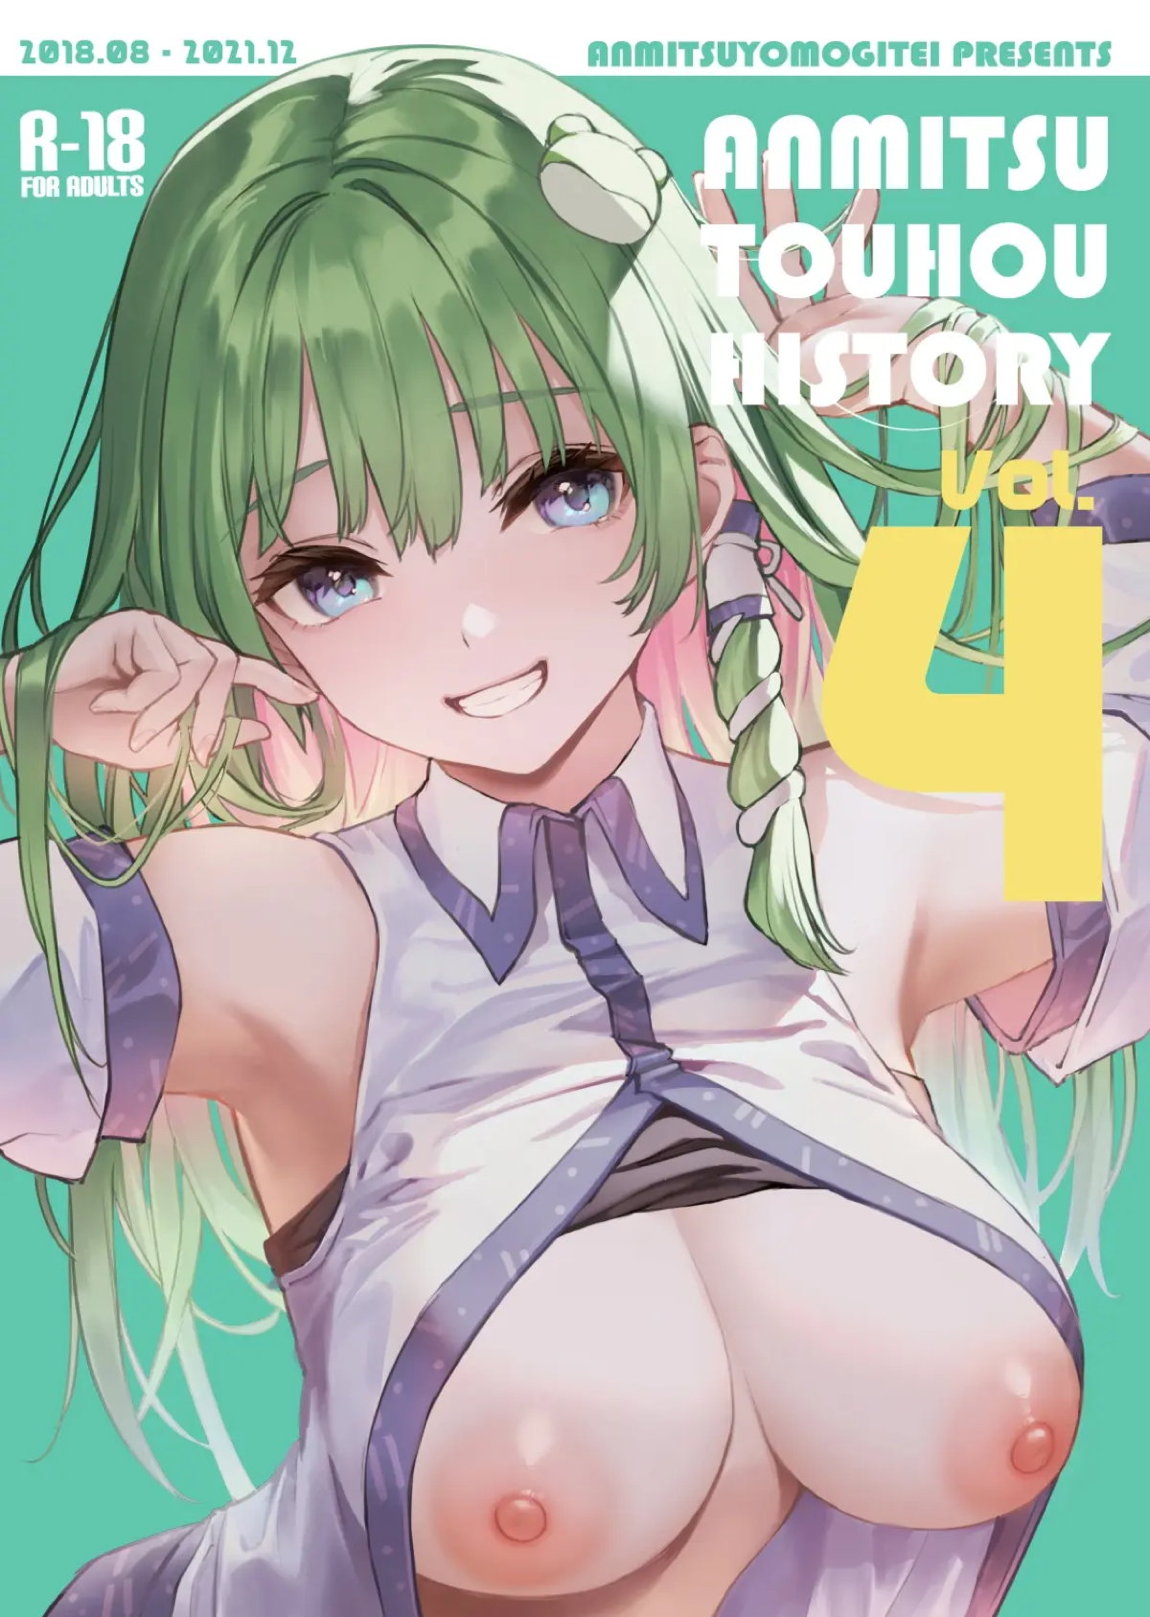 ANMITSU TOUHOU THE AFTER Vol 4 1ページ